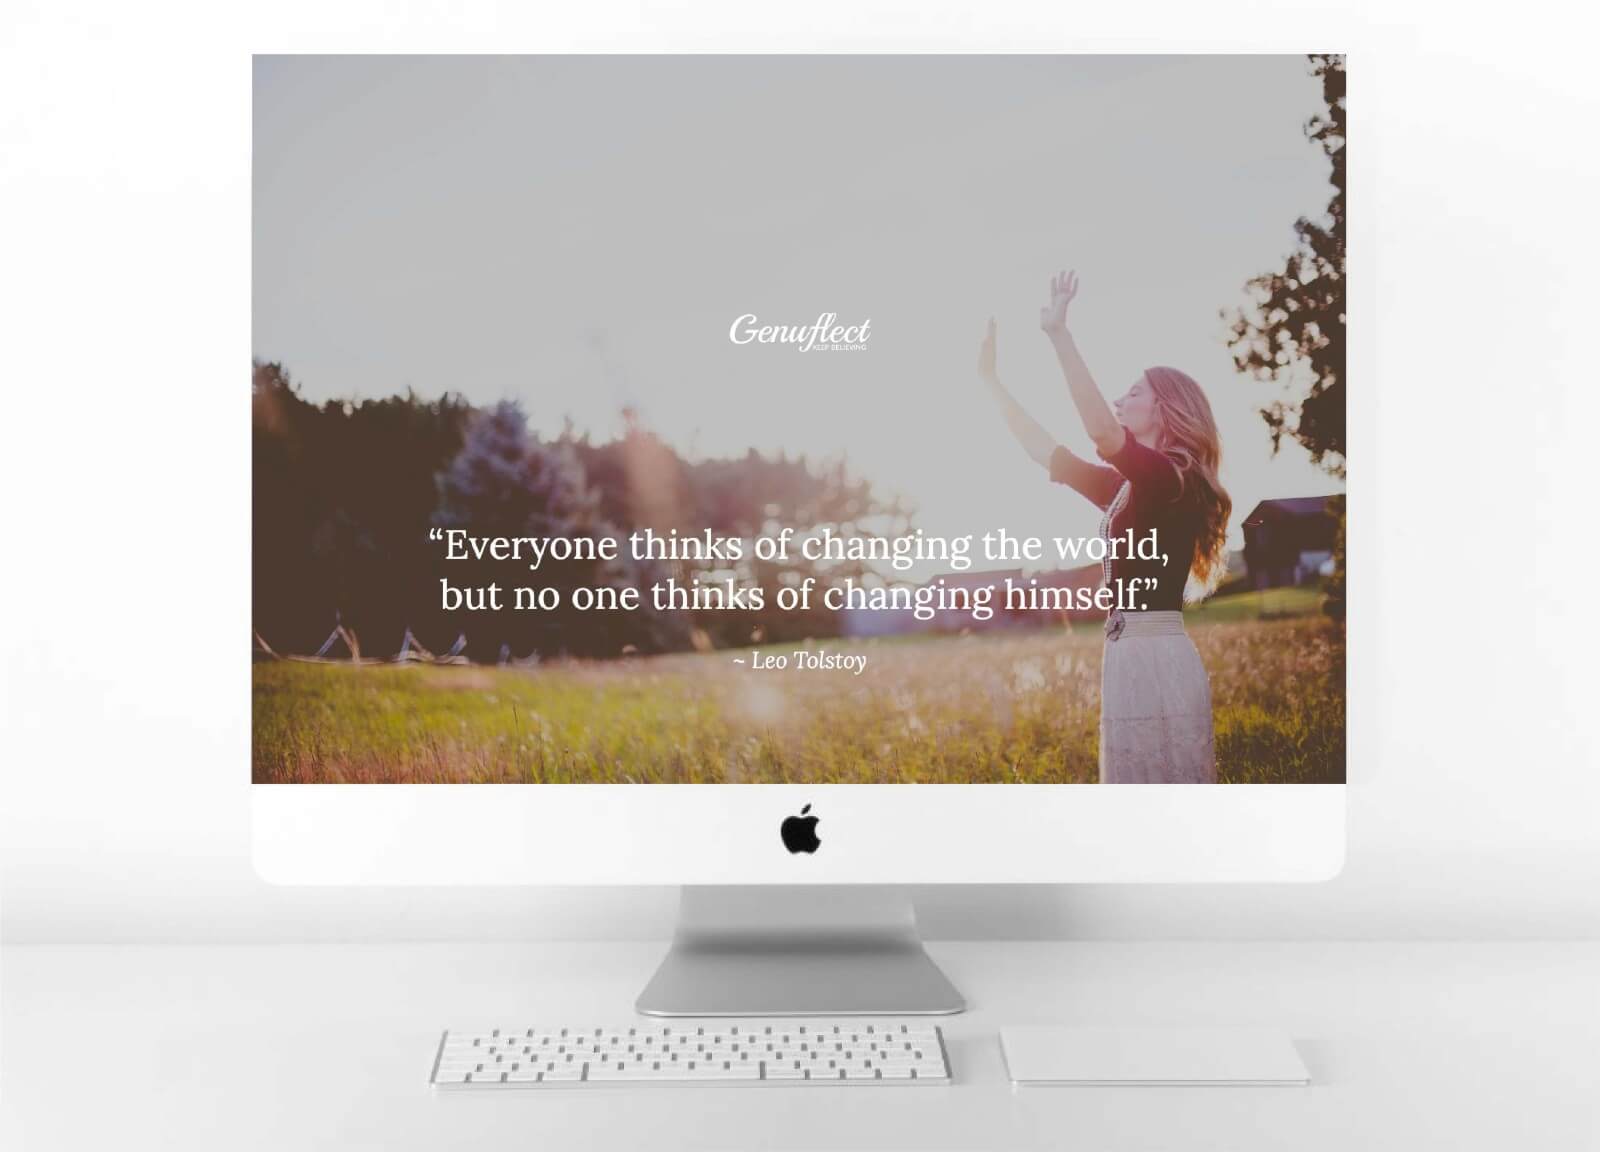 Genuflect - image on computer background of a Woman standing in a field with the bright sunshine on her, hands raised up and looking to the sky